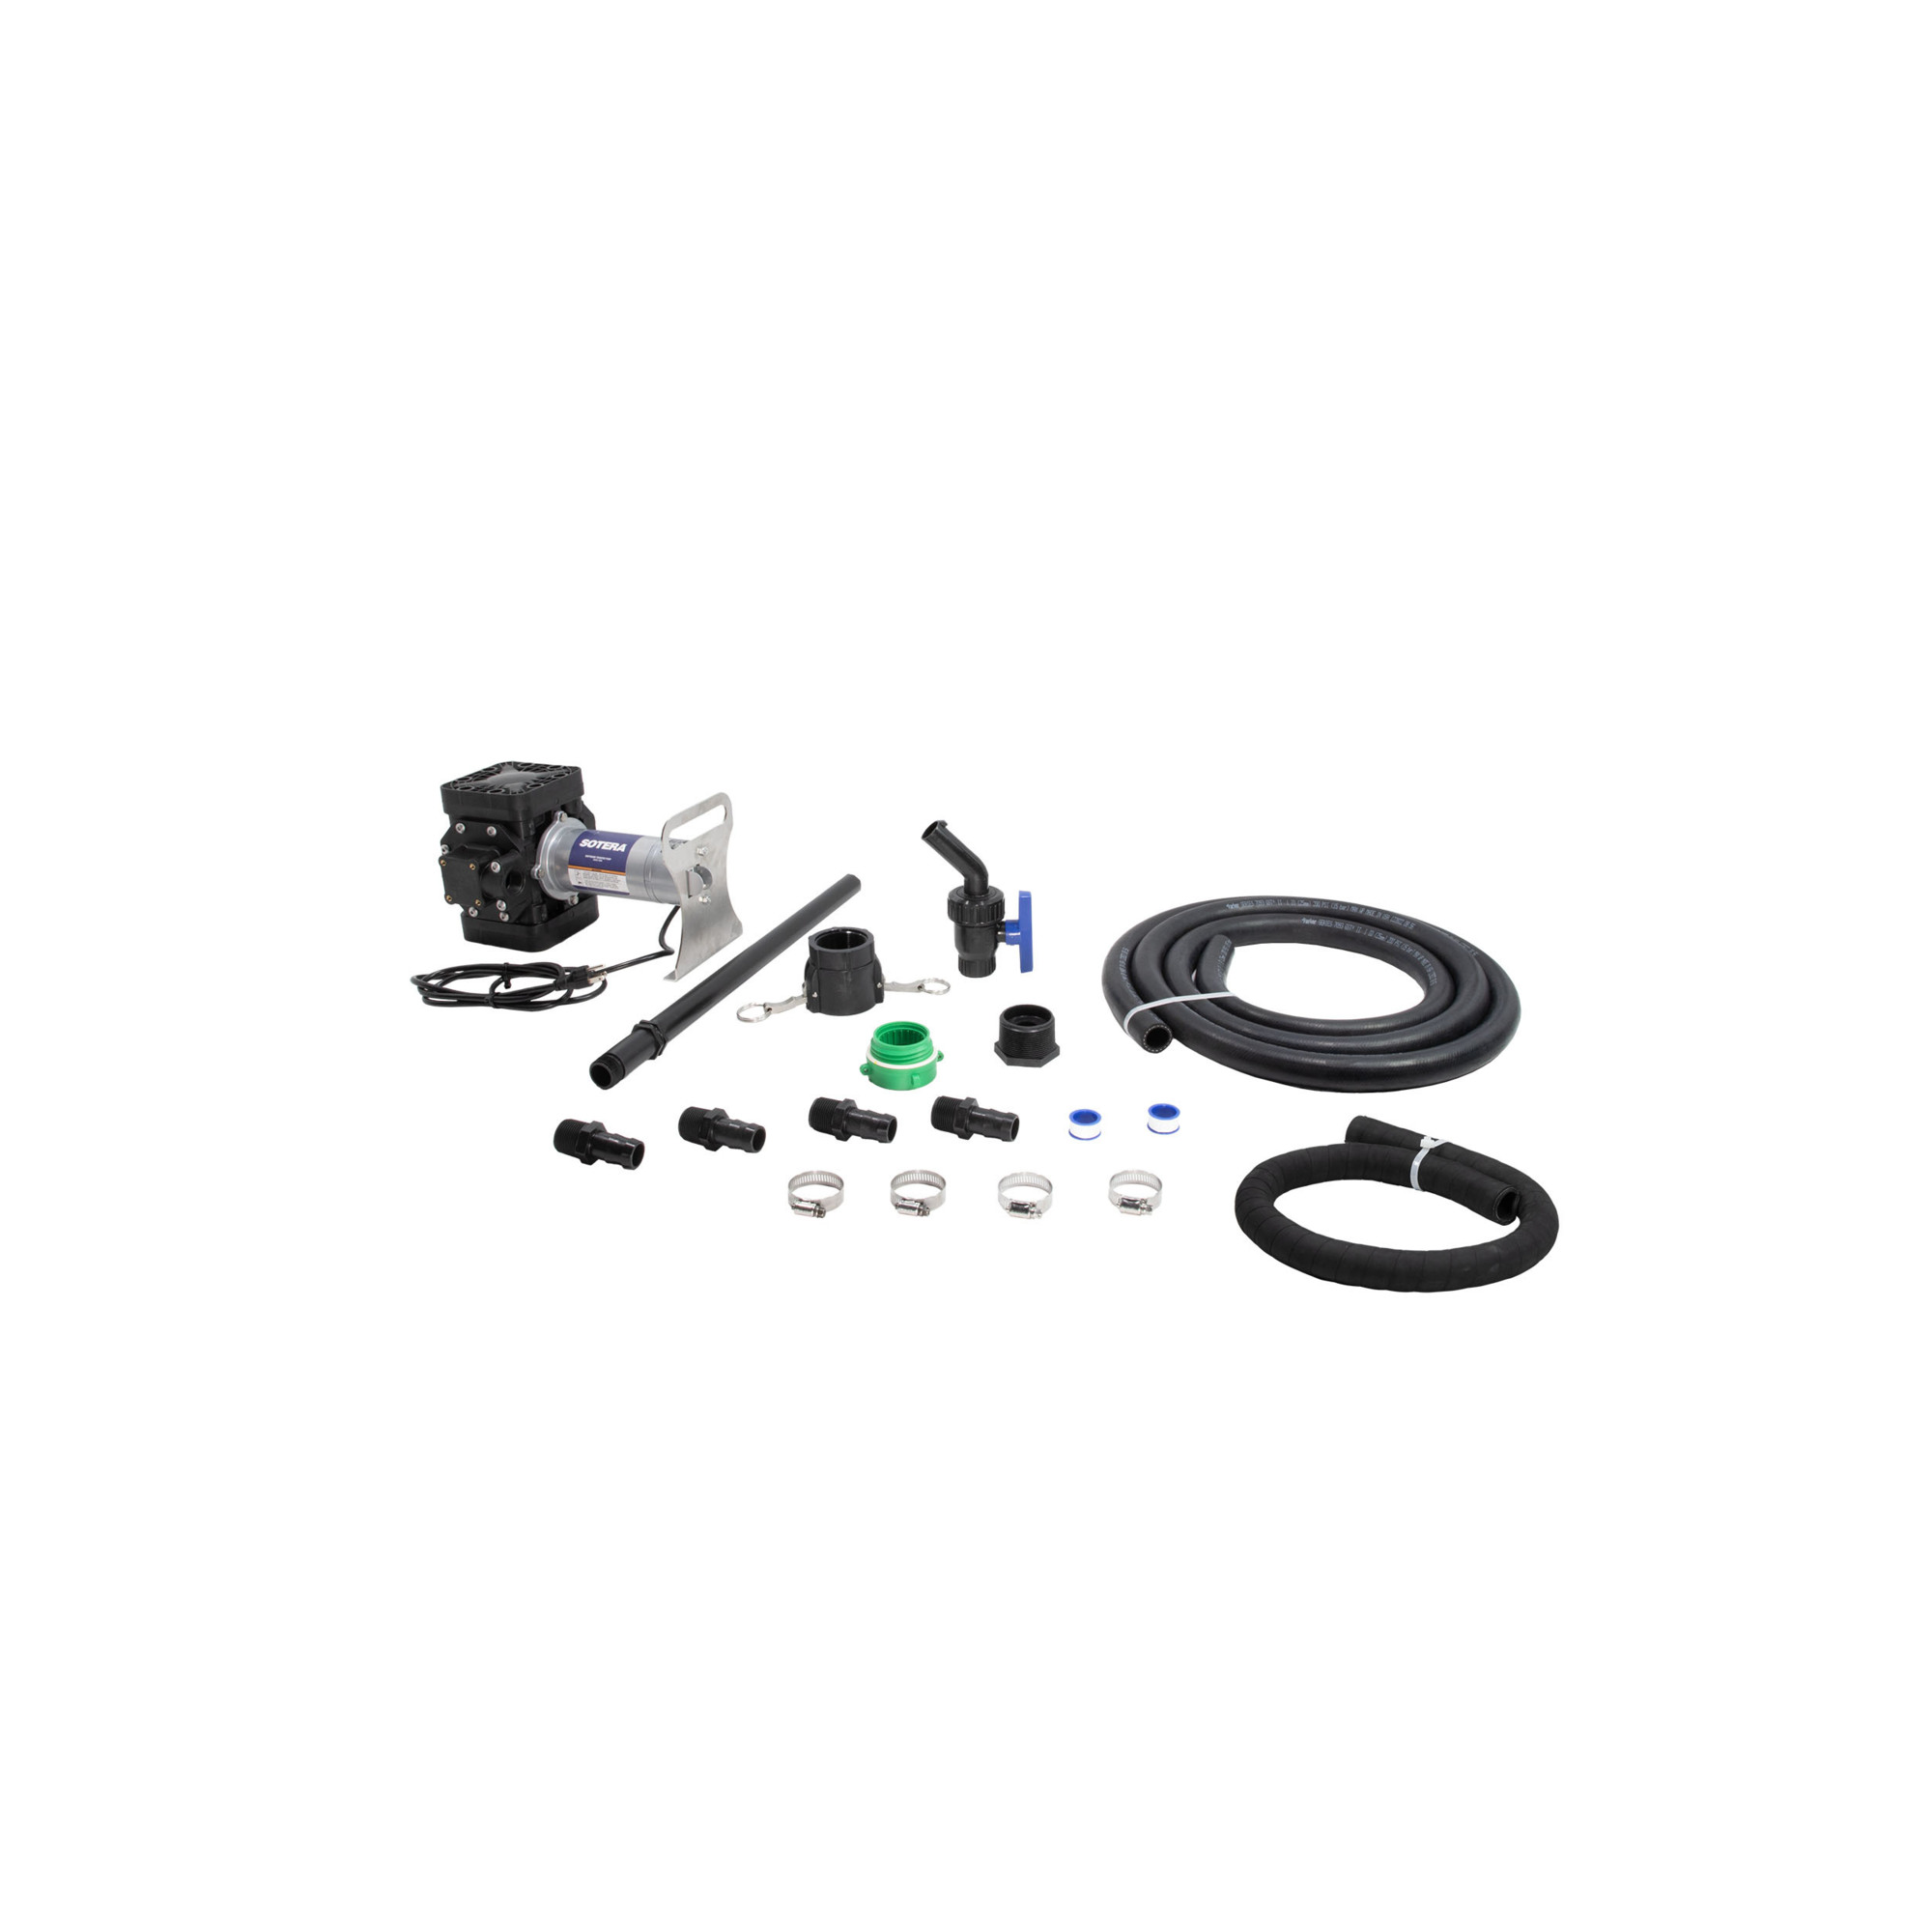 Sotera Systems Tote & Go Pumping Kit â 115VAC, Model SS460BX731PG